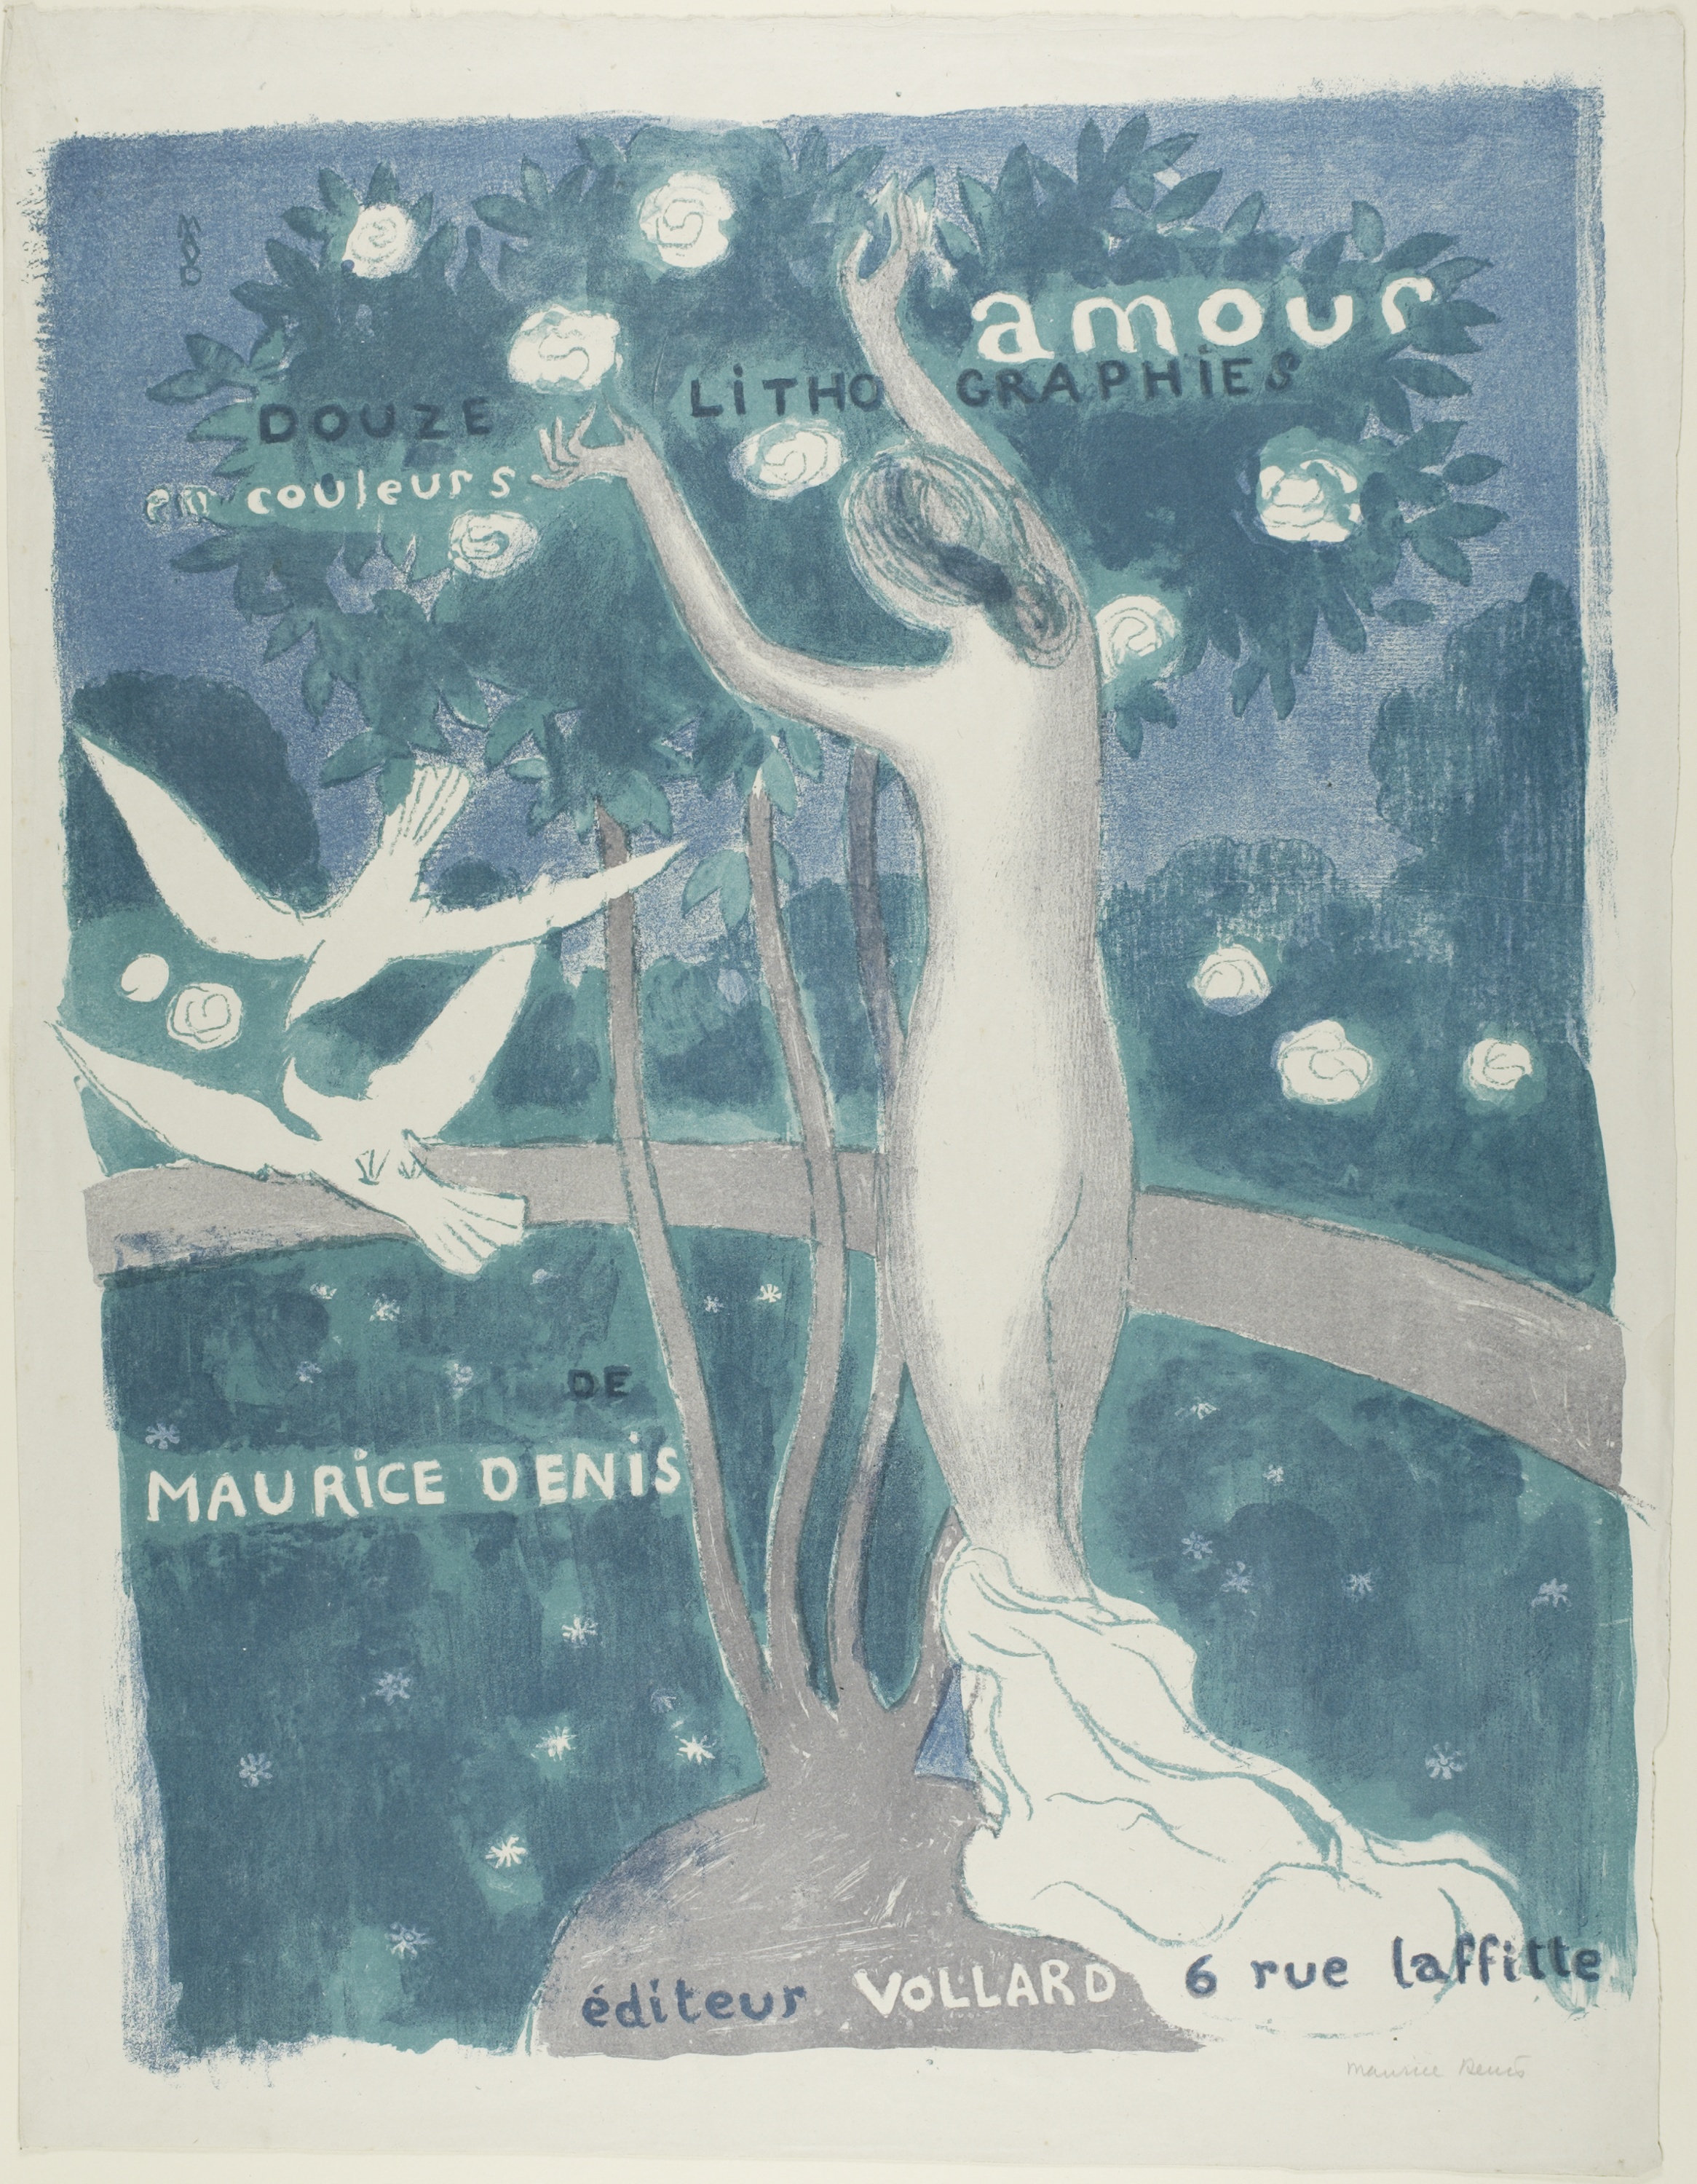 Couverture pour l'Amour by Maurice Denis - 1898 - 52,6 × 42,5 cm Art Institute of Chicago